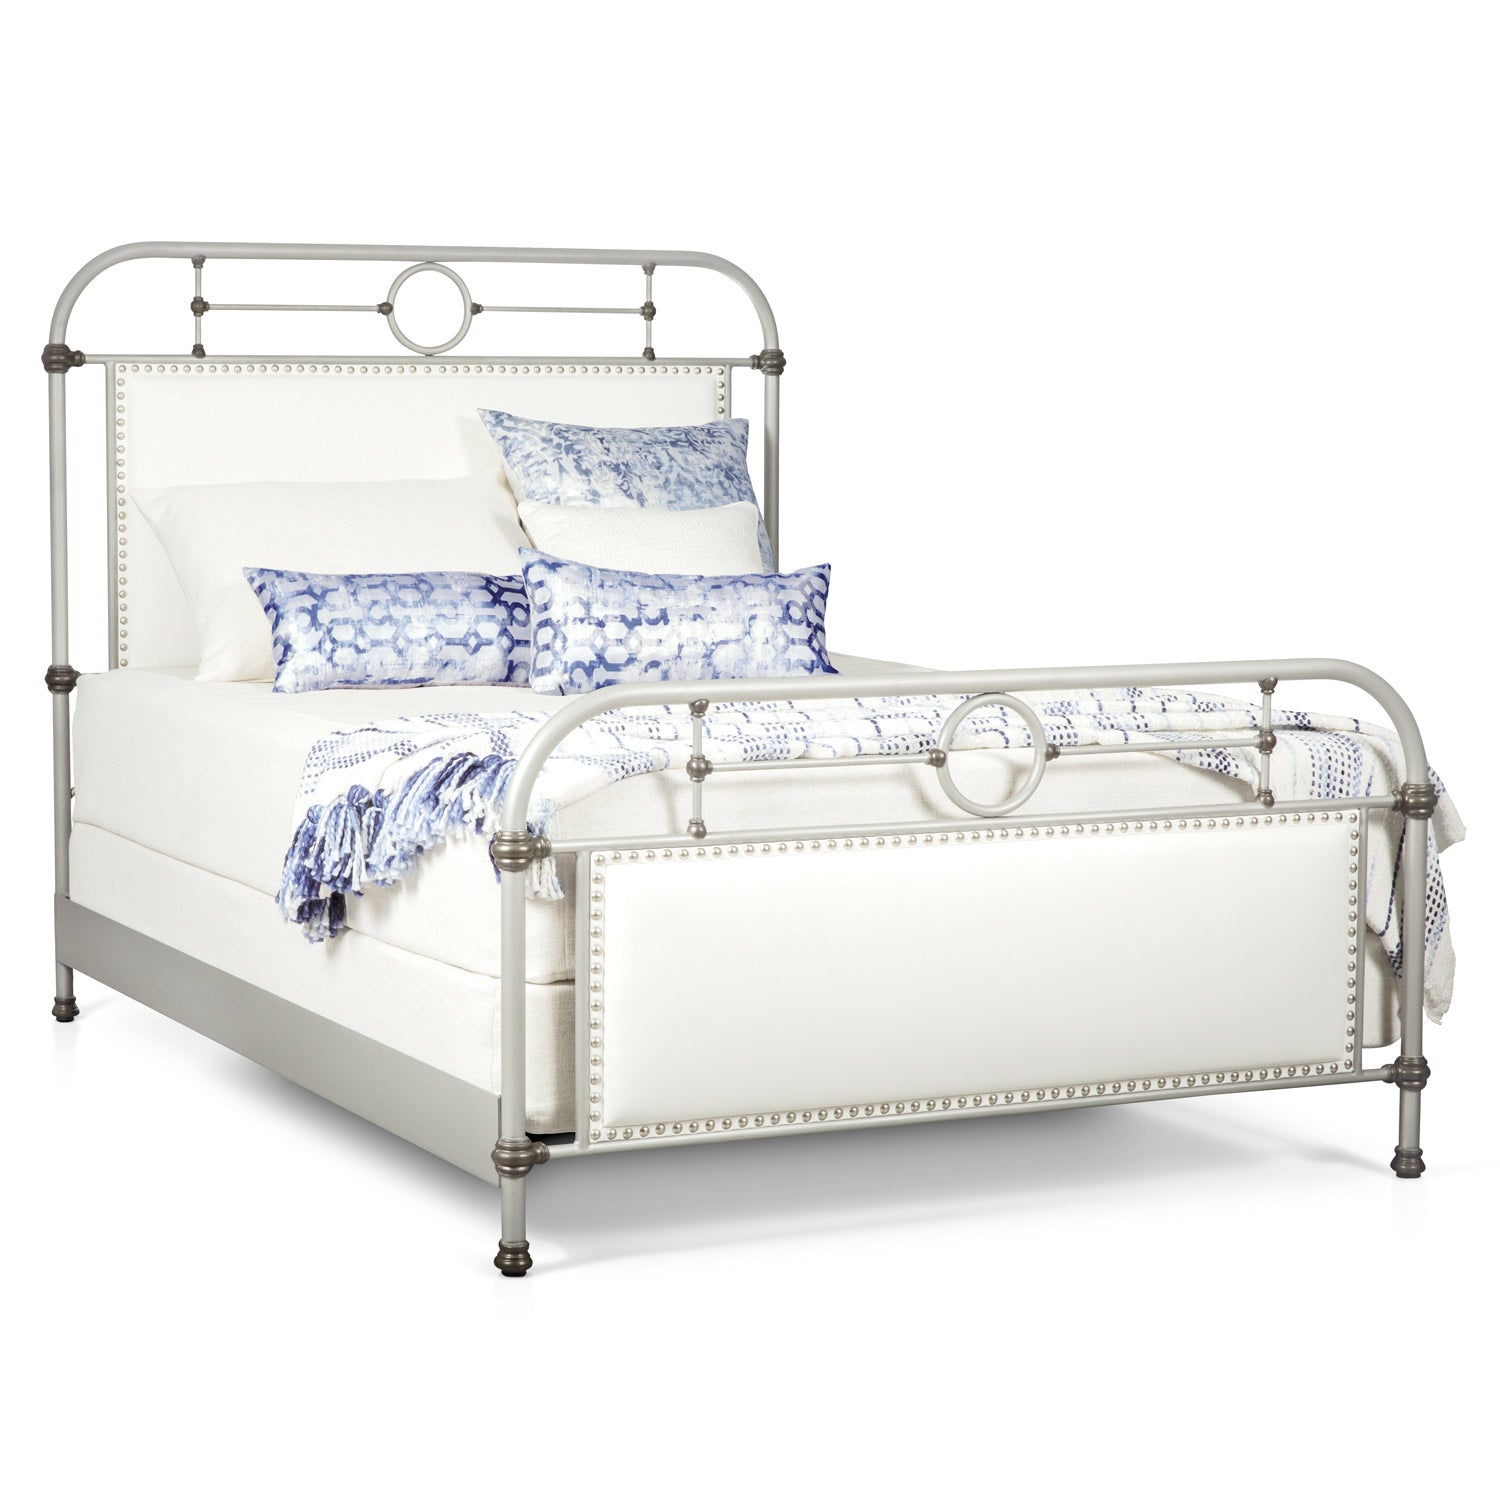 Rochester Upholstered Iron Bed 1245 Wesley Allen Queen CBMPF Aged Nickel Finish Aspen Pure White Upholstery Fabric Glazed Pewter Nailhead Matriae